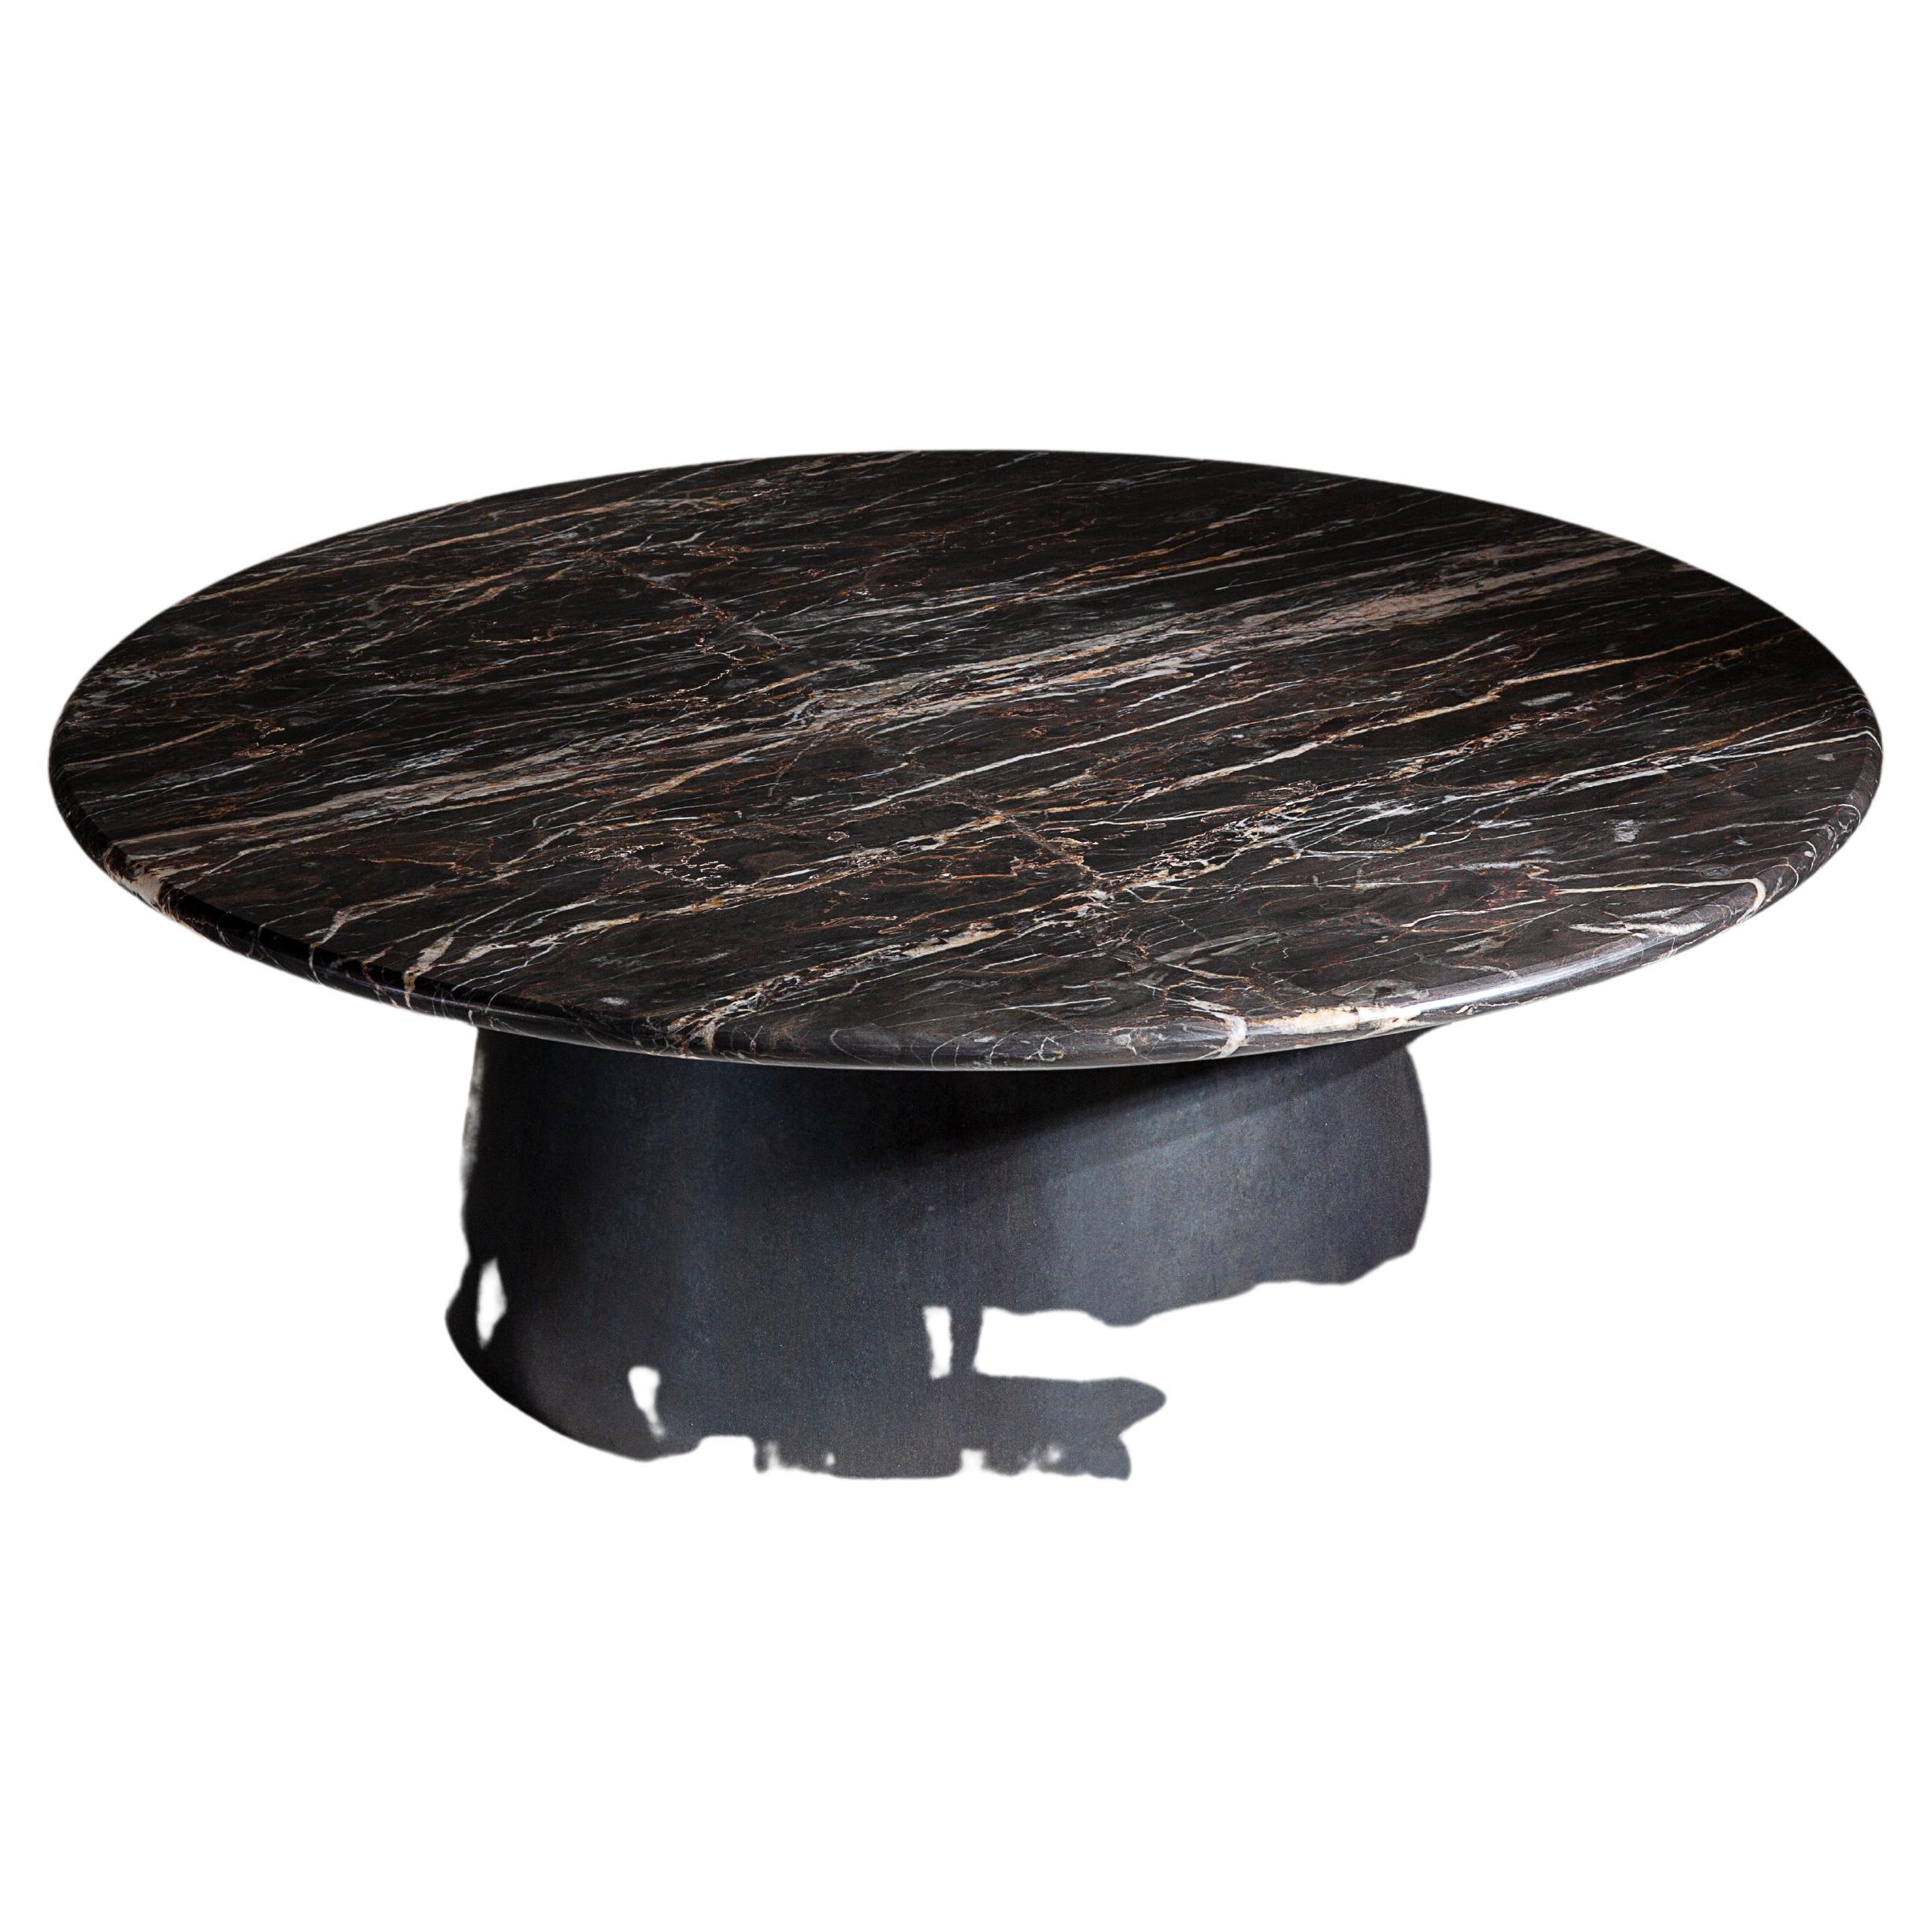 A circular coffee table in incredibly rare British marble and blackened steel. Hand crafted to order in the North.

Measures: 80cm diameter x 35cm height.
Custom finishes and sizes available upon request.

Made to order in 12 weeks.
Price excludes